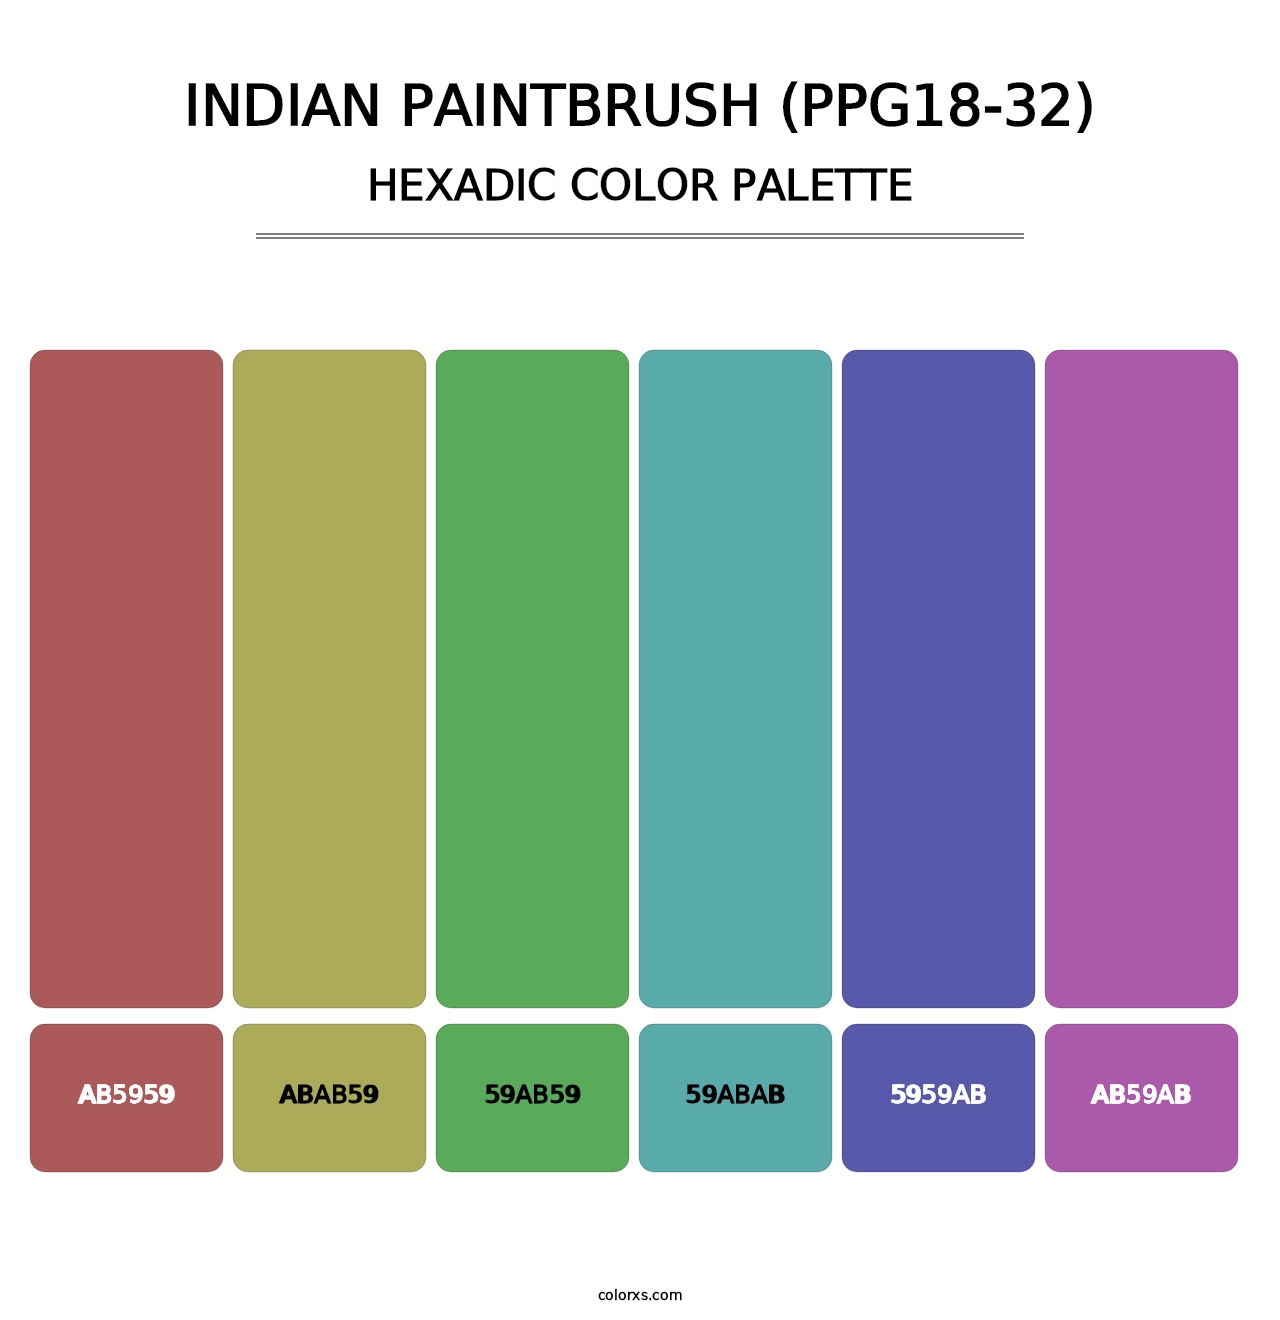 Indian Paintbrush (PPG18-32) - Hexadic Color Palette